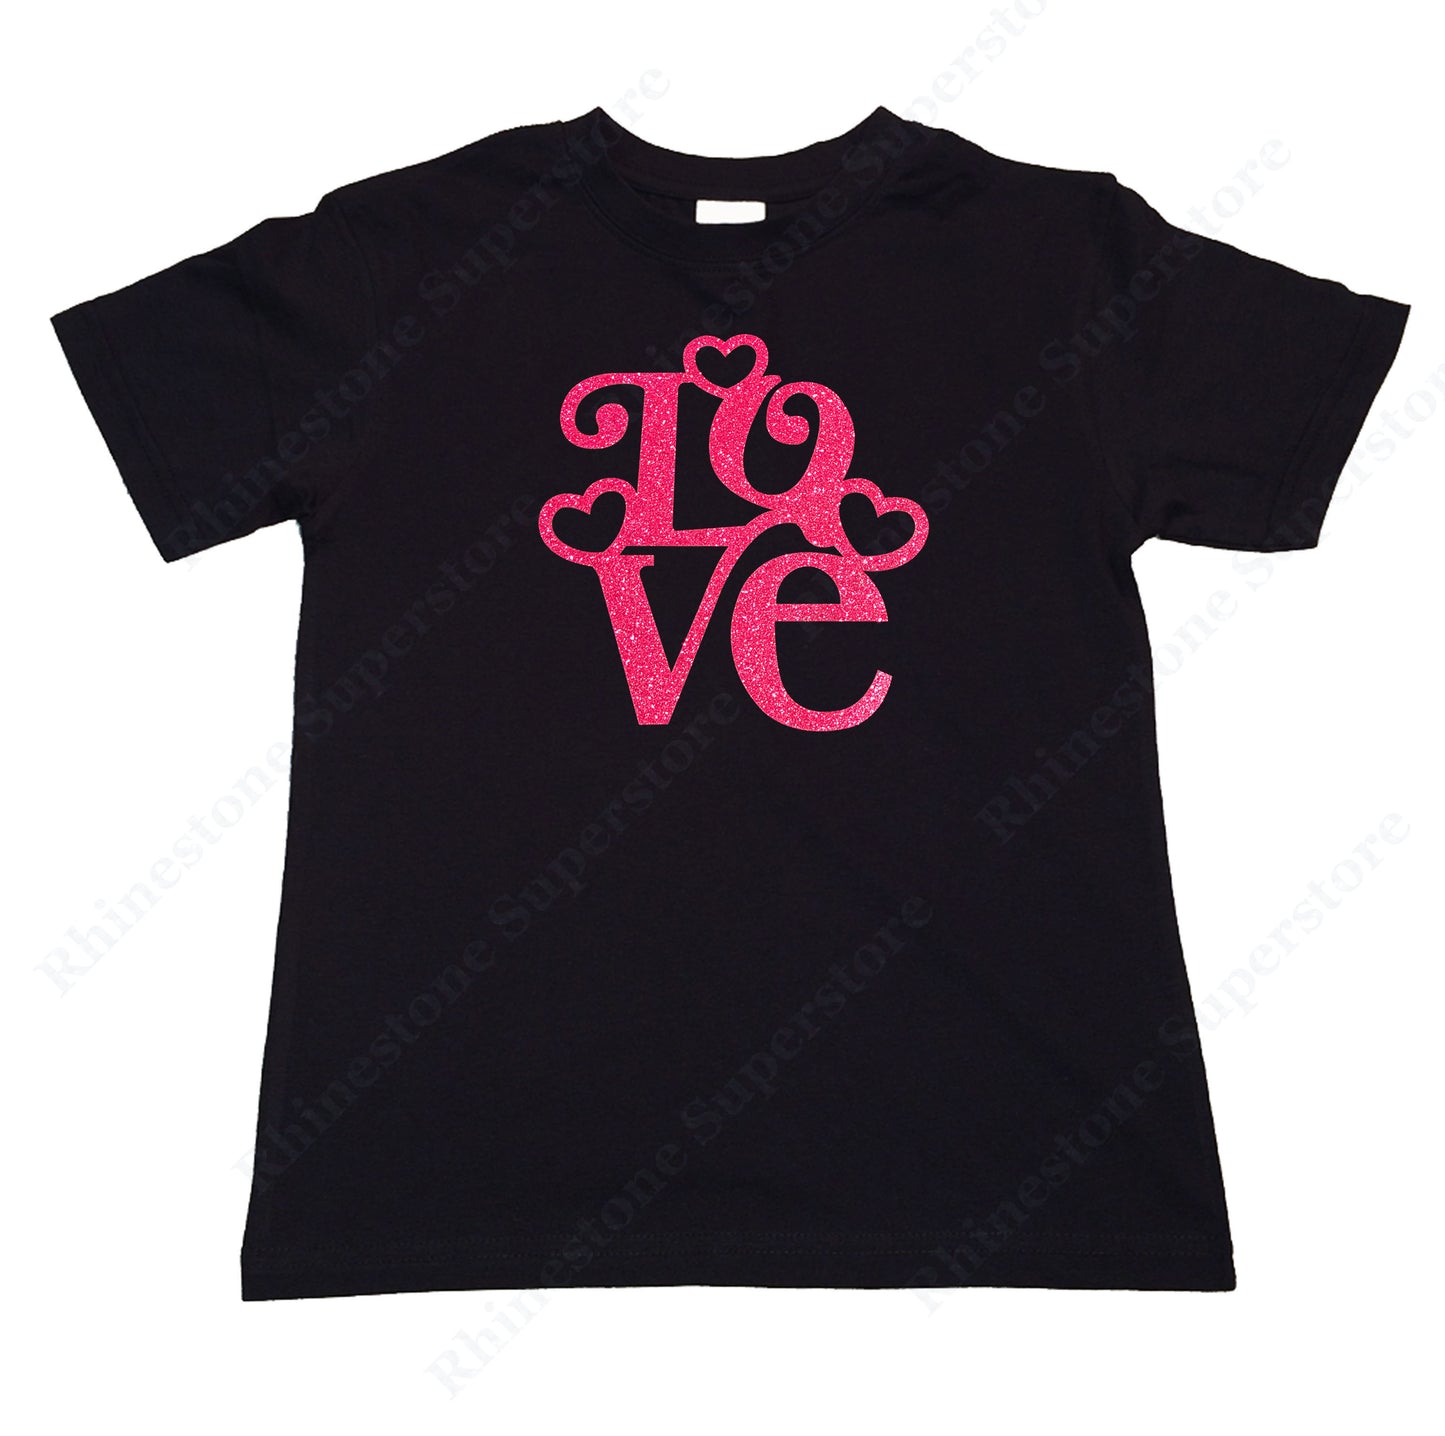 Girls Rhinestone T-Shirt " Love with Hearts in Pink Glitters " Kids Size 3 to 14 Available